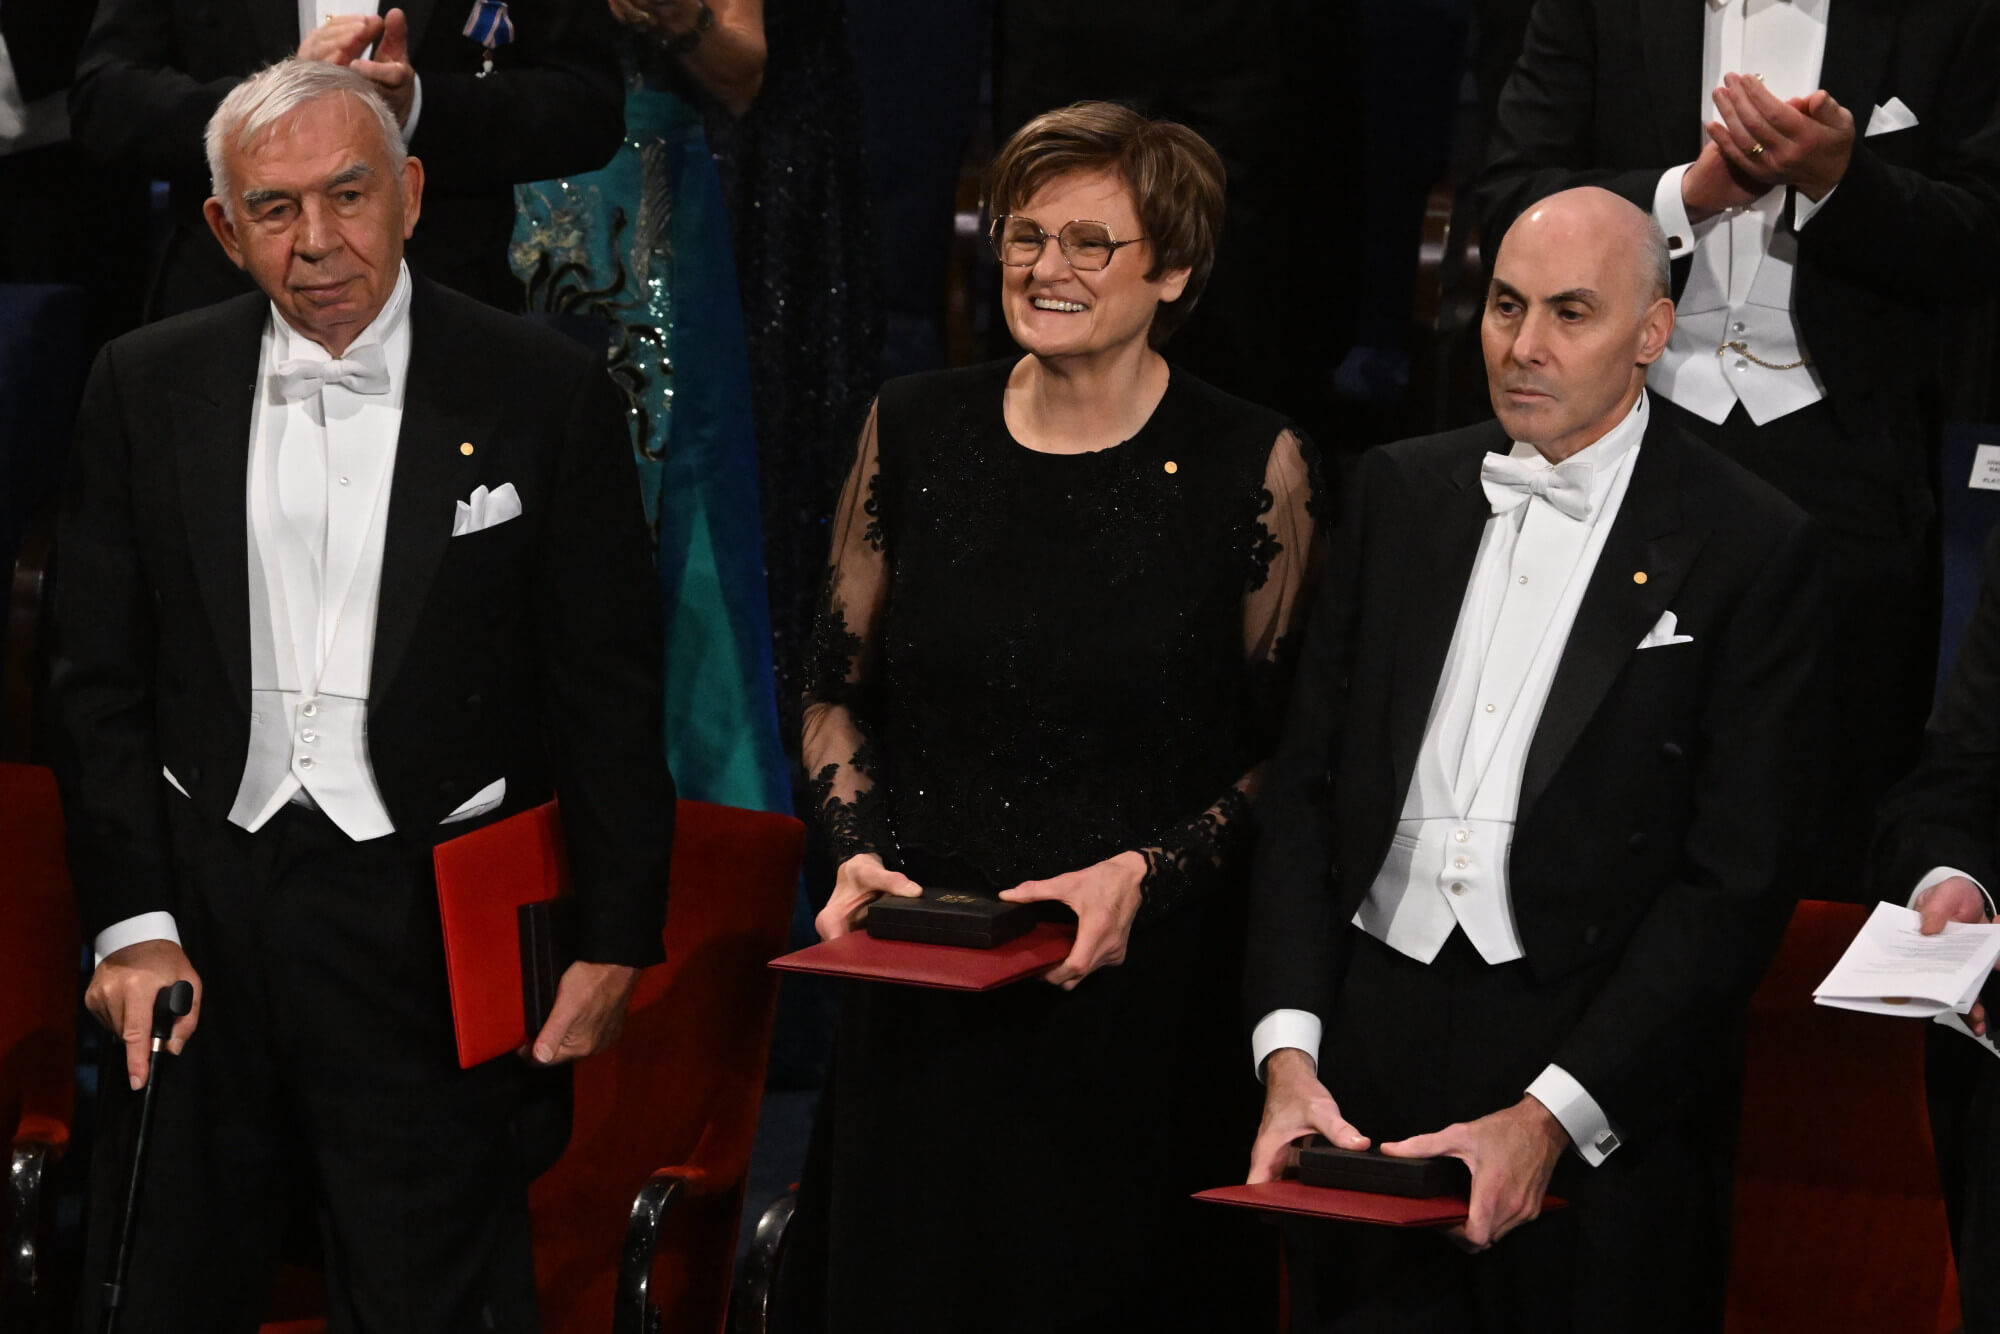 Watch: Nobel Prize Presented to Hungary’s Biochemist by Swedish King